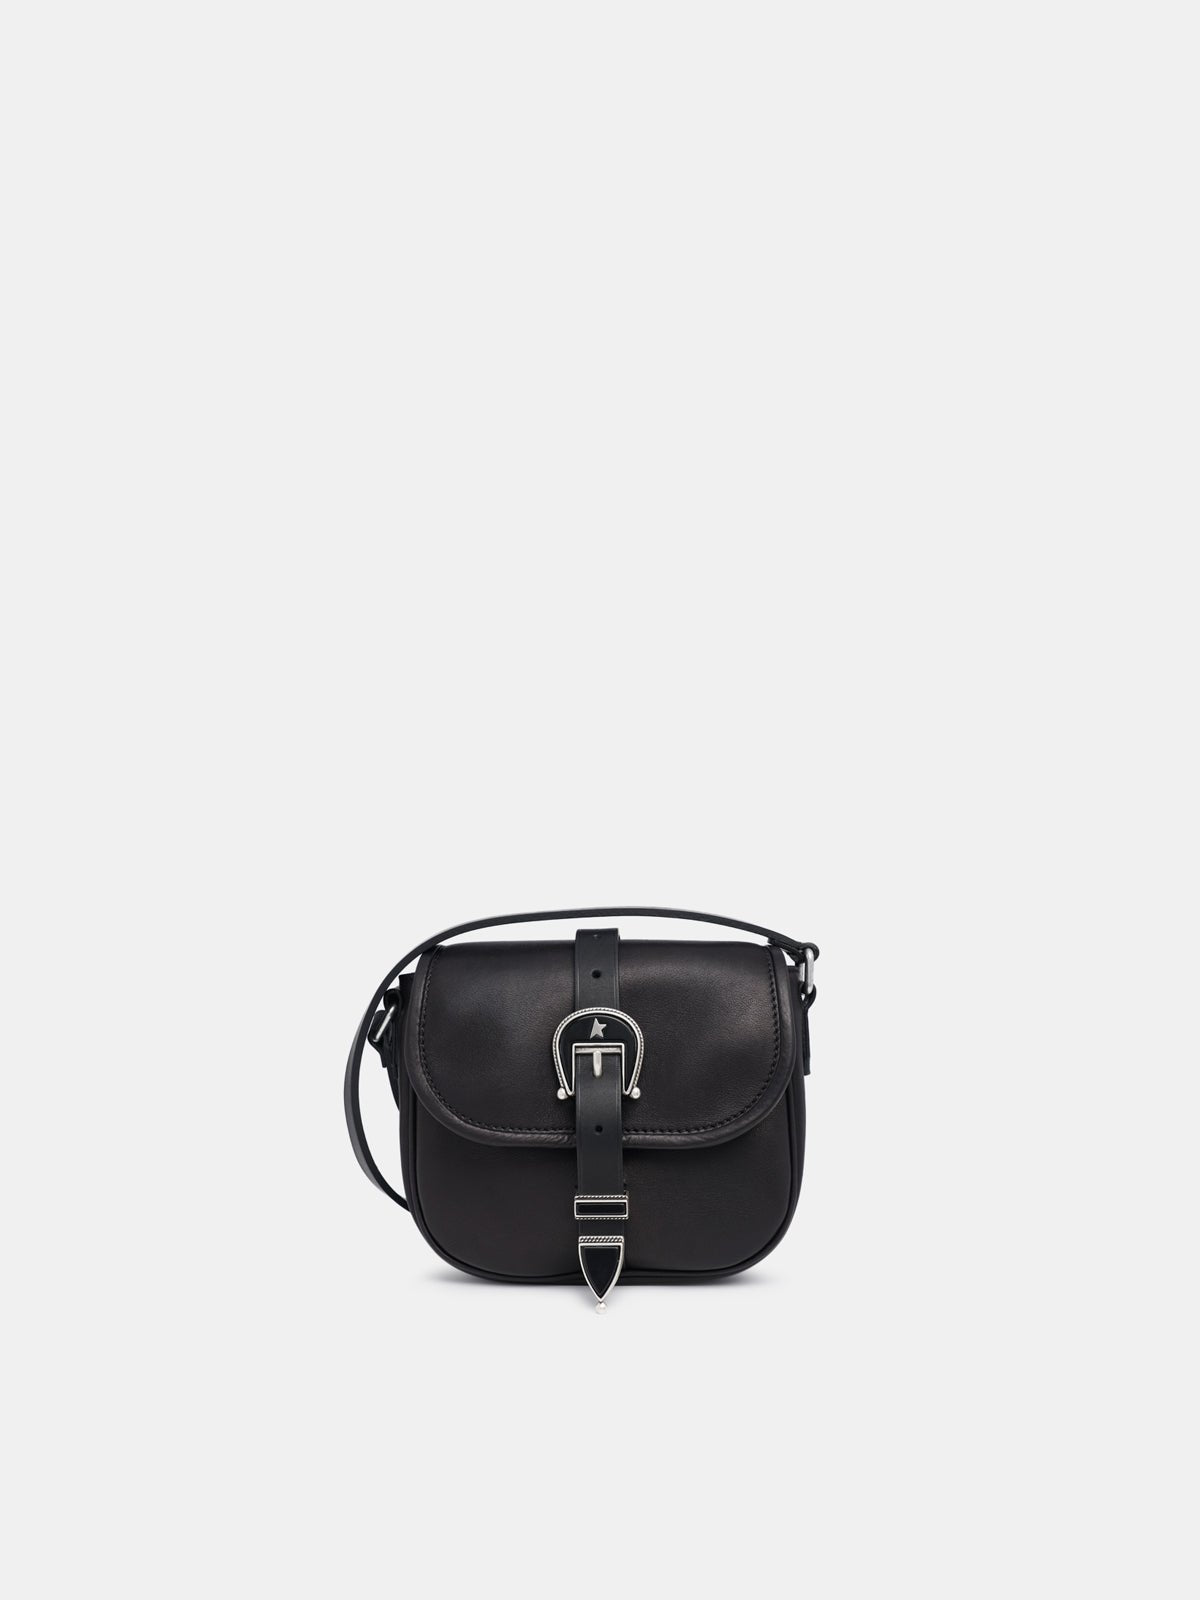 Small black leather Rodeo Bag - thegreatputonmvSmall black leather Rodeo BagSmall black leather Rodeo BagSmall black leather Rodeo BagHandbagGolden Goosethegreatputonmv107497Small black leather Rodeo Bag69036985